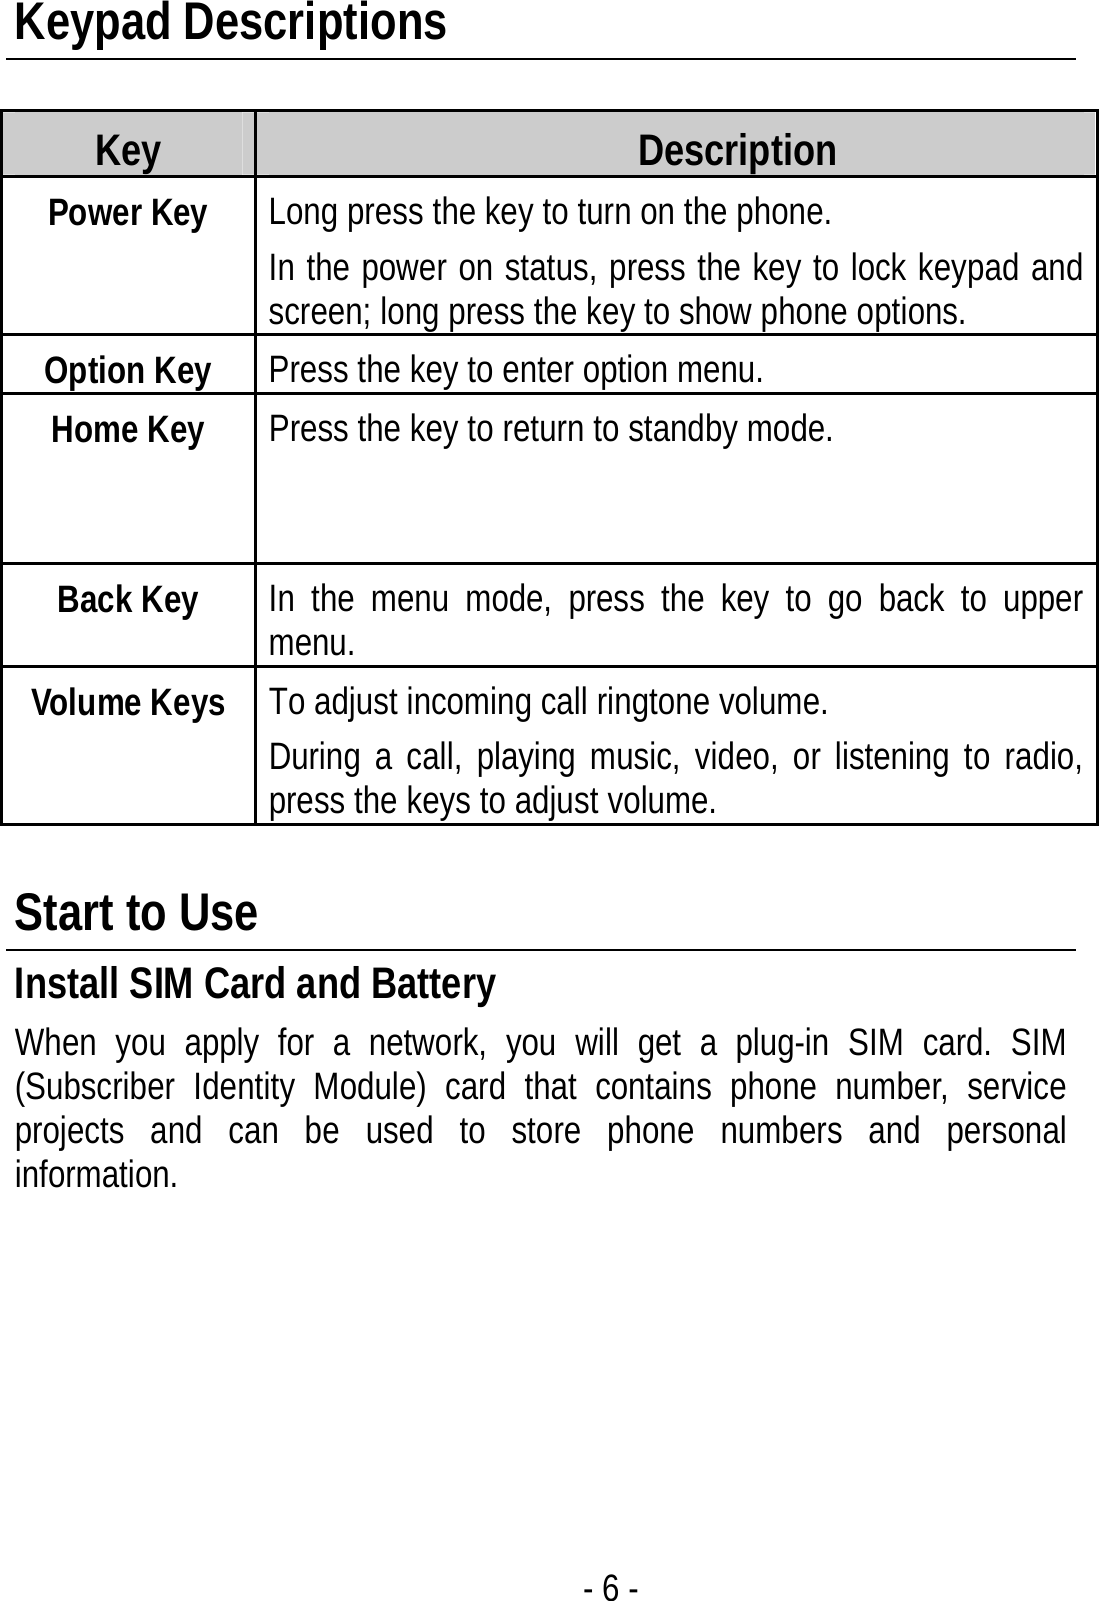 - 6 - Keypad Descriptions  Key Description Power Key  Long press the key to turn on the phone. In the power on status, press the key to lock keypad and screen; long press the key to show phone options. Option Key Press the key to enter option menu. Home Key  Press the key to return to standby mode.    Back Key  In the menu mode, press the key to go back to upper menu. Volume Keys  To adjust incoming call ringtone volume. During a call, playing music, video, or listening to radio, press the keys to adjust volume.  Start to Use Install SIM Card and Battery When you apply for a network, you will get a plug-in SIM card. SIM (Subscriber Identity Module) card that contains phone number, service projects and can be used to store phone numbers and personal information. 